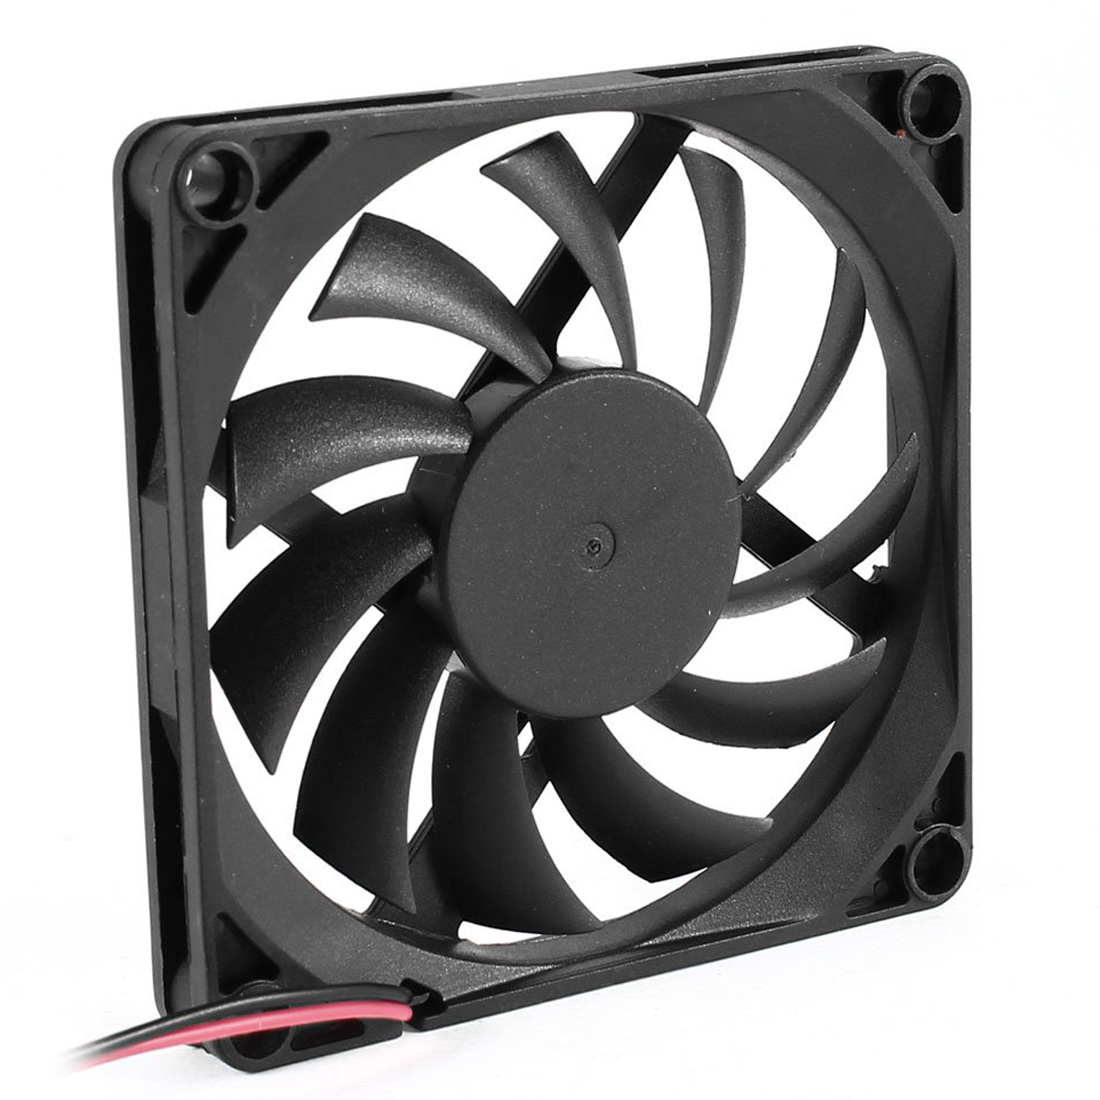 PROMOTION! Hot 80mm 2 Pin Connector Cooling Fan for Computer Case CPU Cooler Radiator